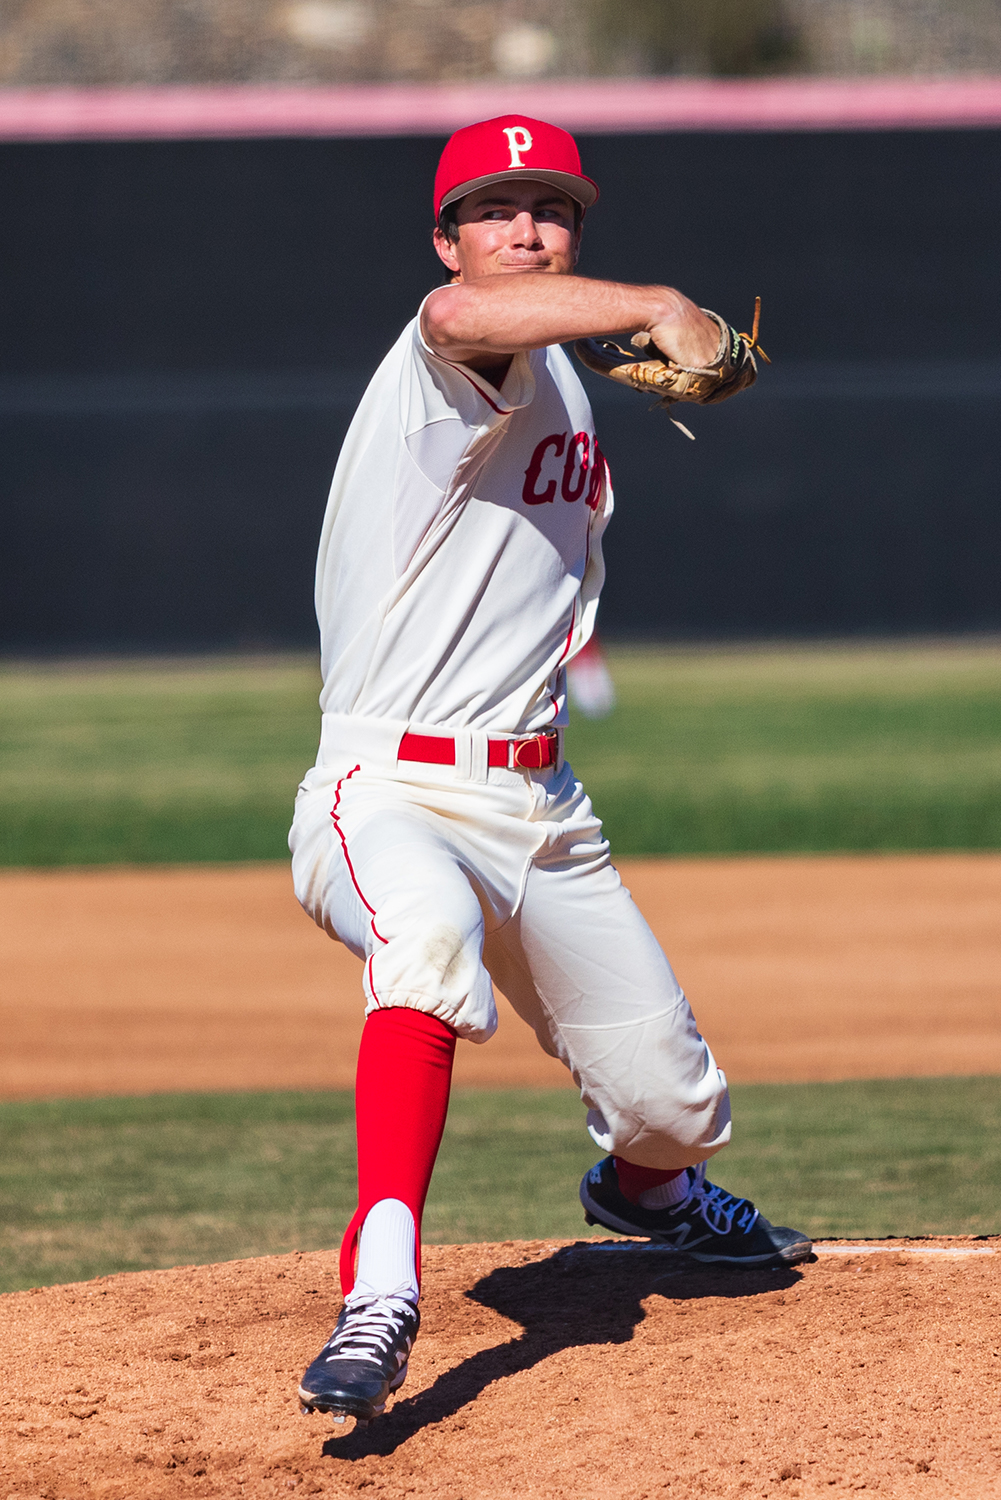 A male Palomar baseball pitcher prepares to throw a baseball with his left hand, which is hidden behind his body due to a direct front view of the pitcher.